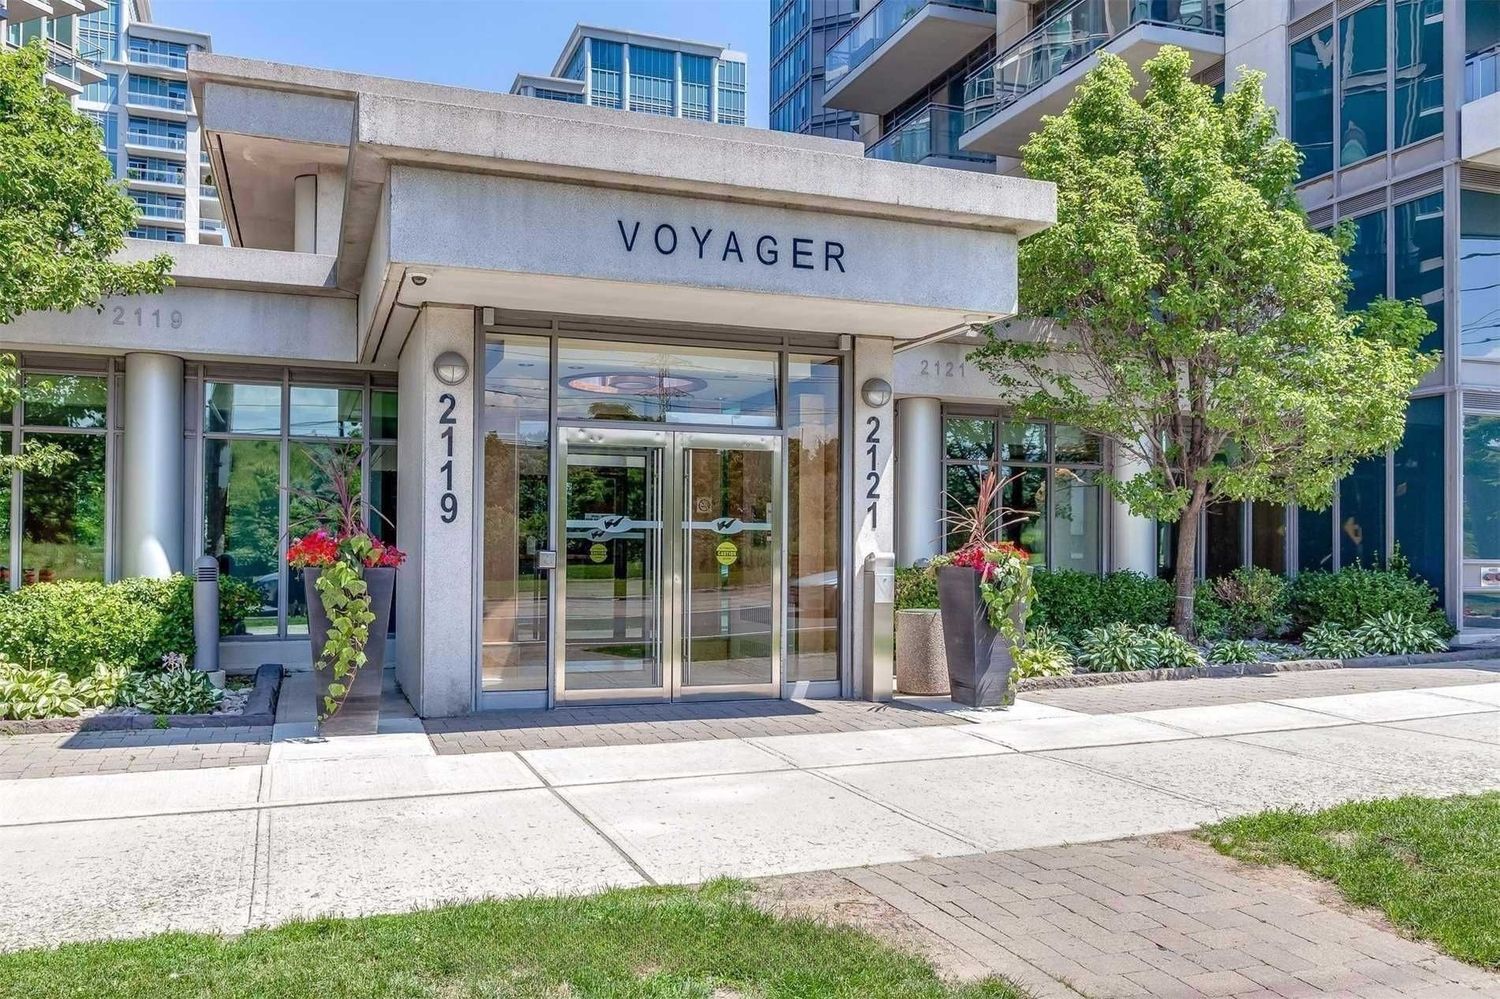 2121 Lake Shore Boulevard W. Voyager I at Waterview Condos is located in  Etobicoke, Toronto - image #5 of 13